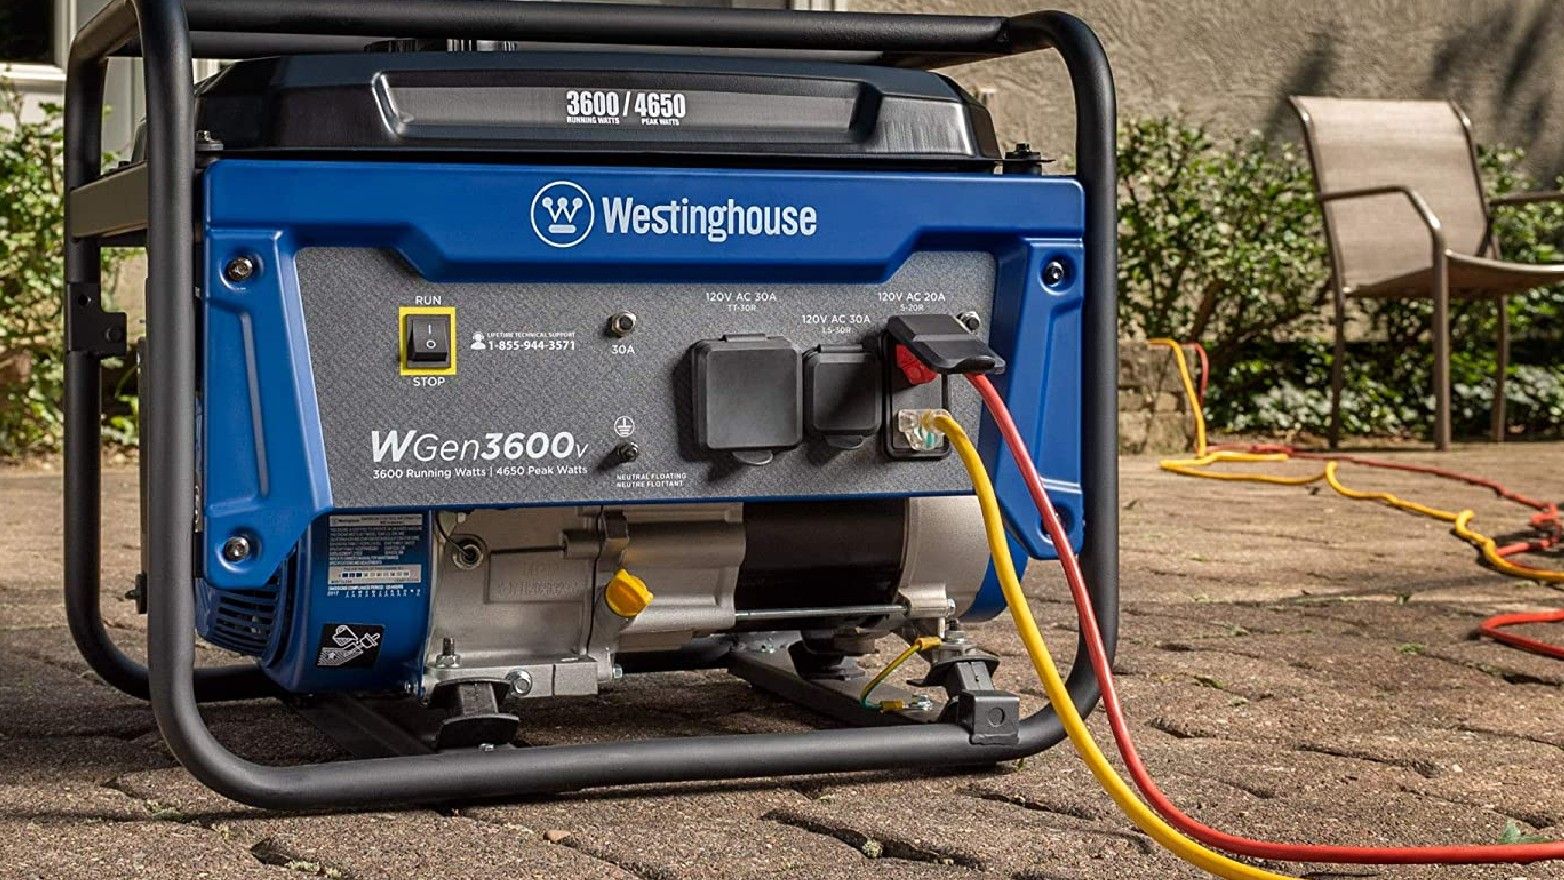 A Westinghouse generator with power leads plugged into it